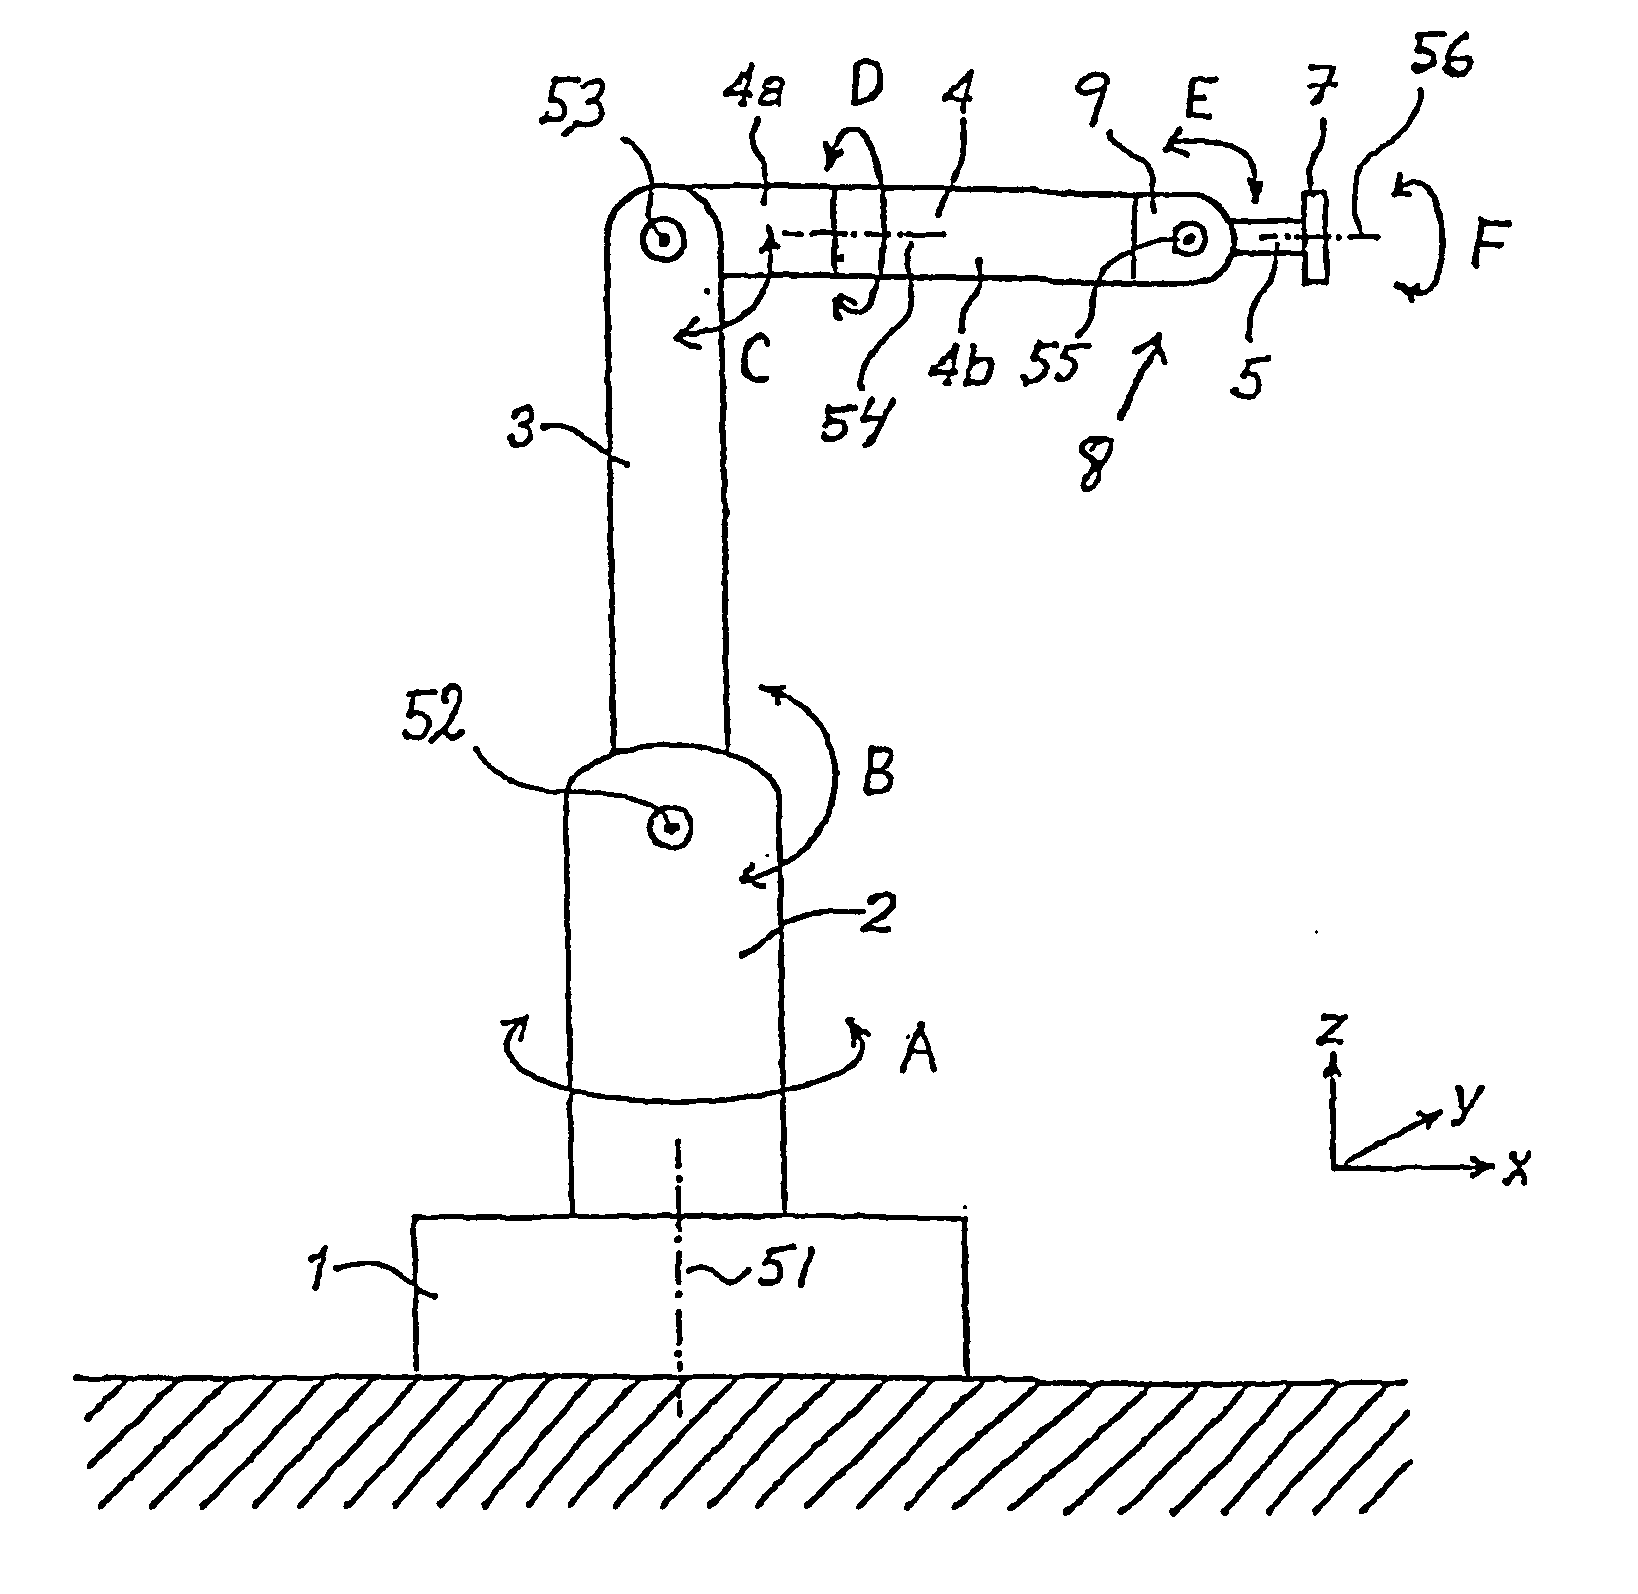 Robot wrist comprising a drive unit incorporated in a tilt